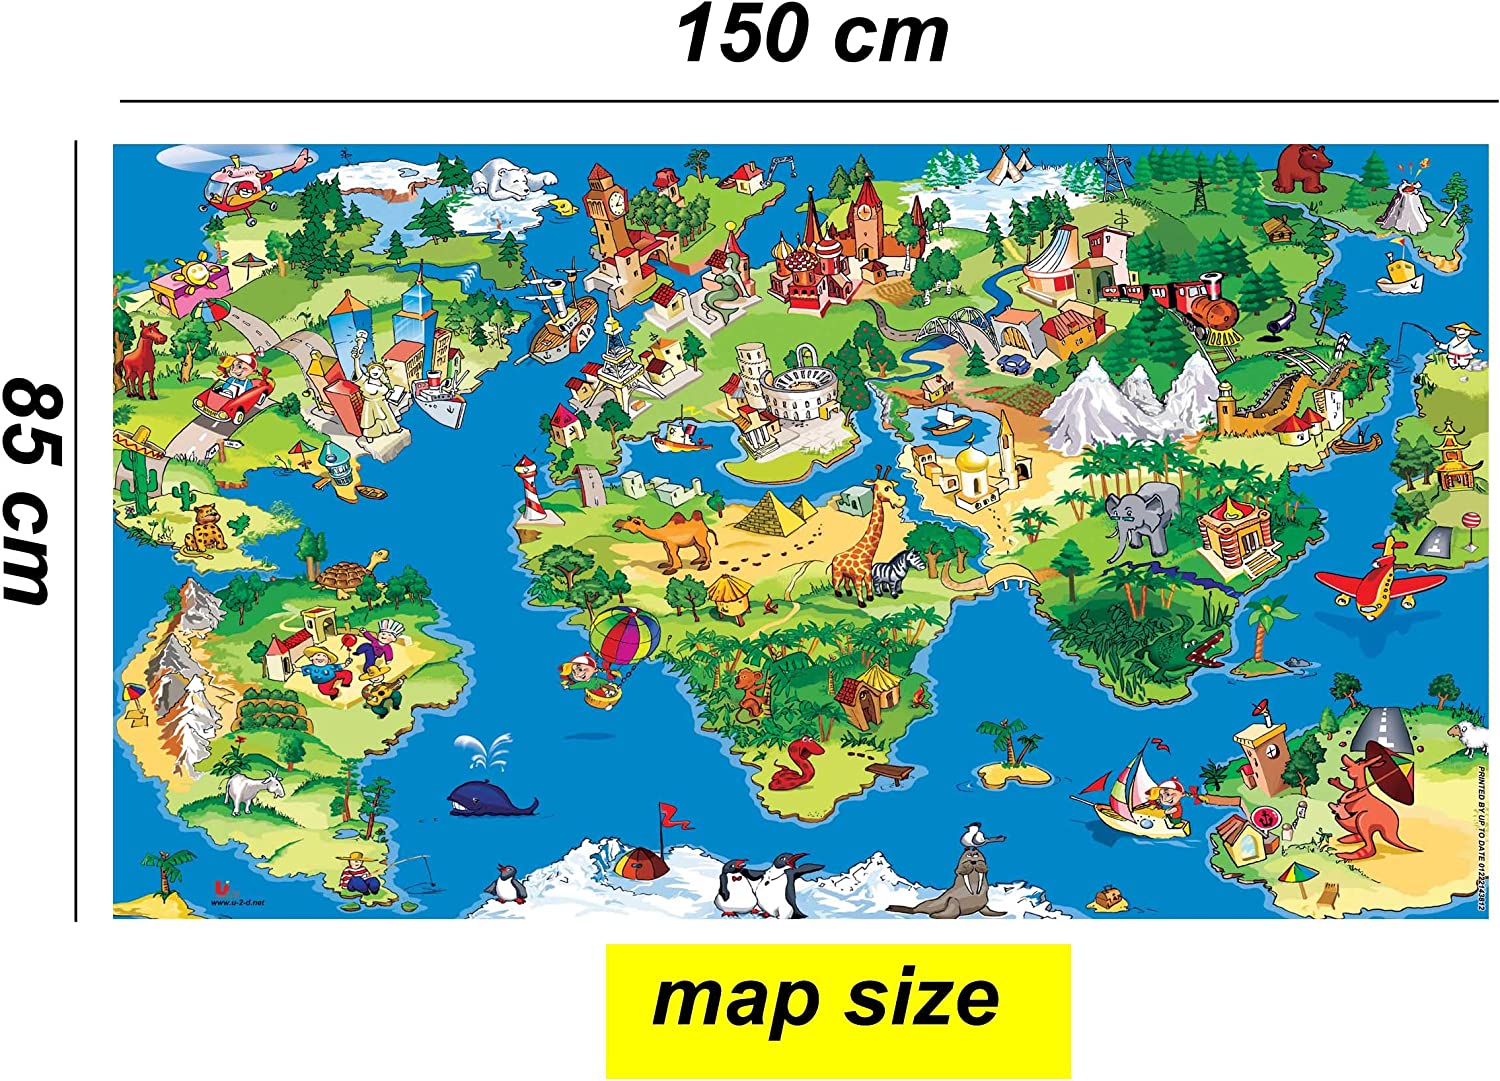 A colorful cartoon map for children showing the country's landmarks